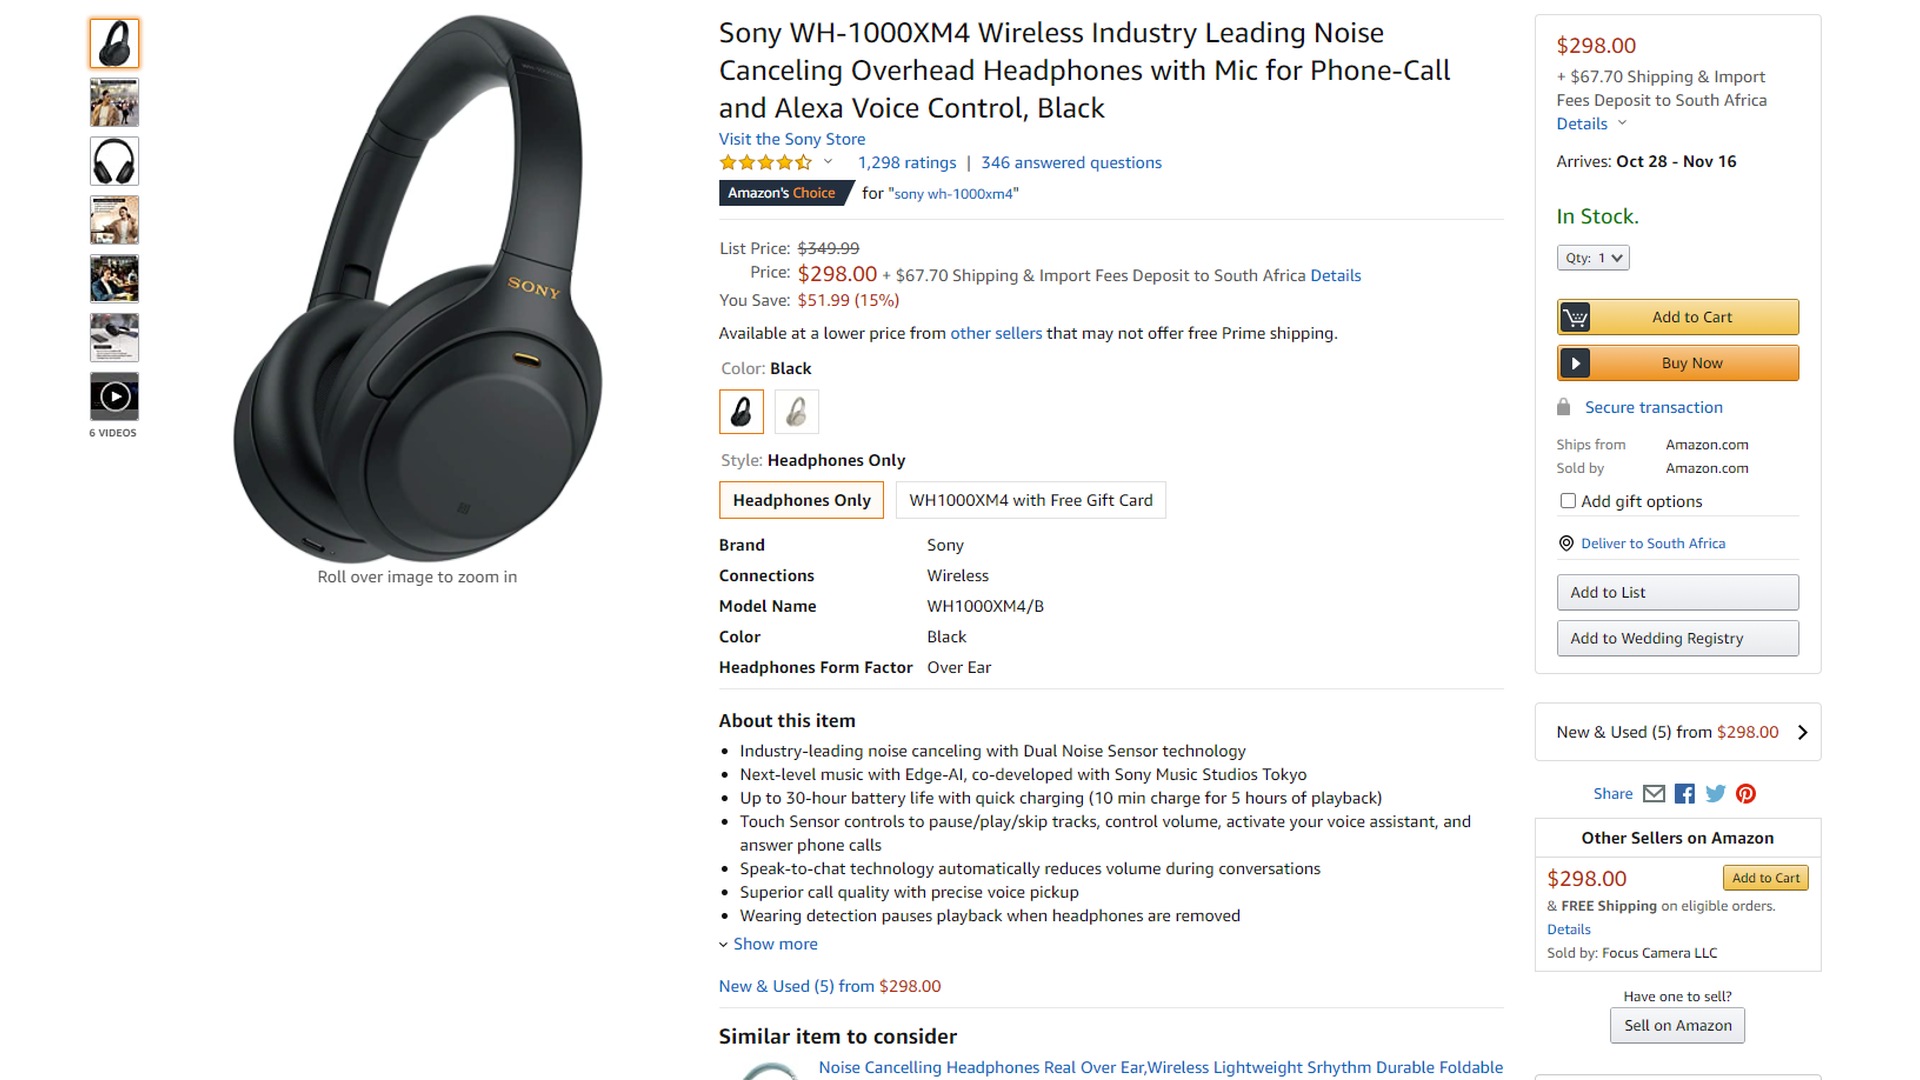 sony WH 1000XM4 amazon prime day deal